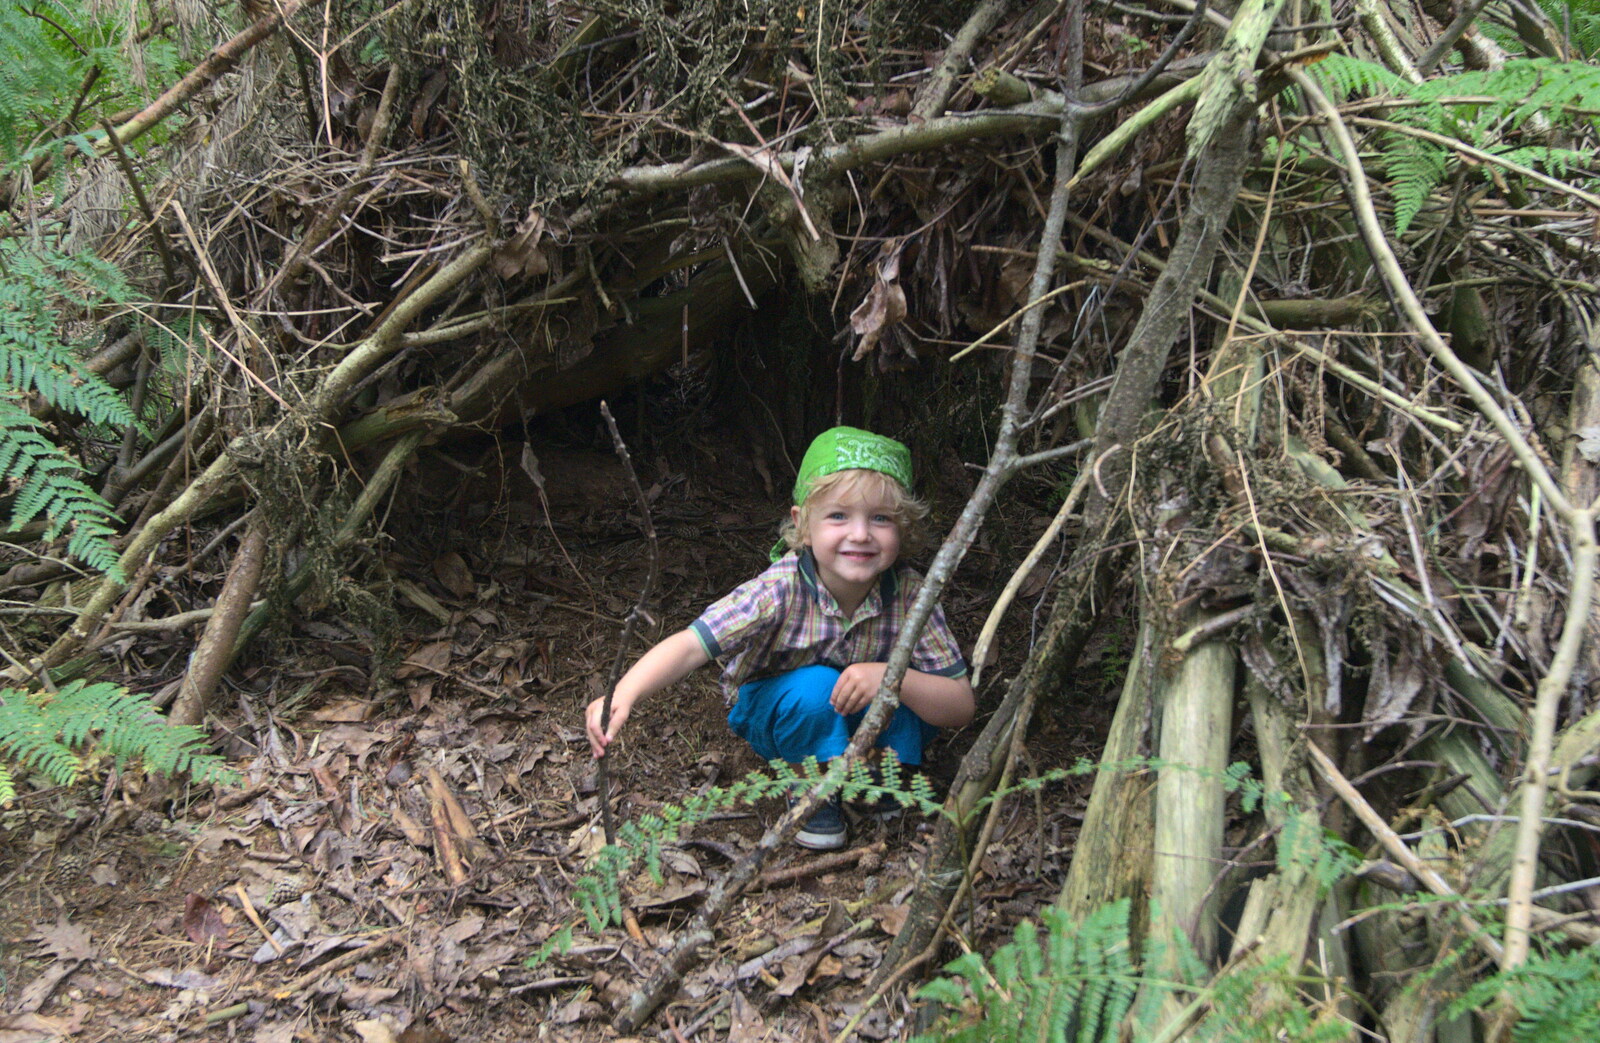 Fred discovers a den in the woods from Camping by the Seaside, Cliff House, Dunwich, Suffolk - 15th August 2012